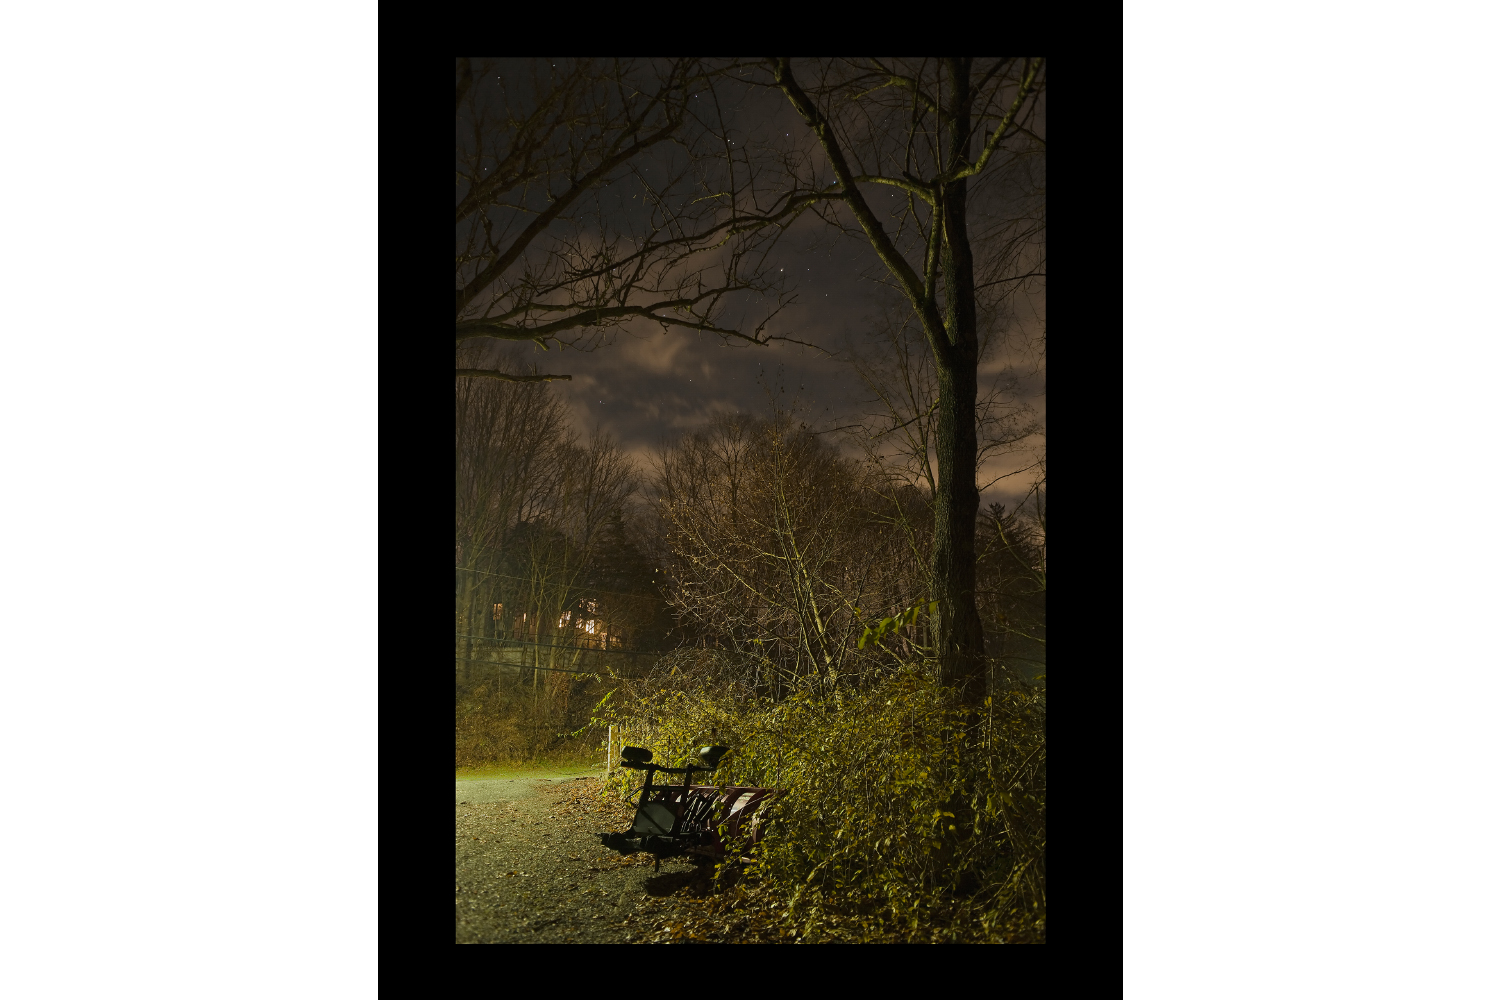 #8031 Plow in Bushes, Bedford, NY, 2011, 26"x36"